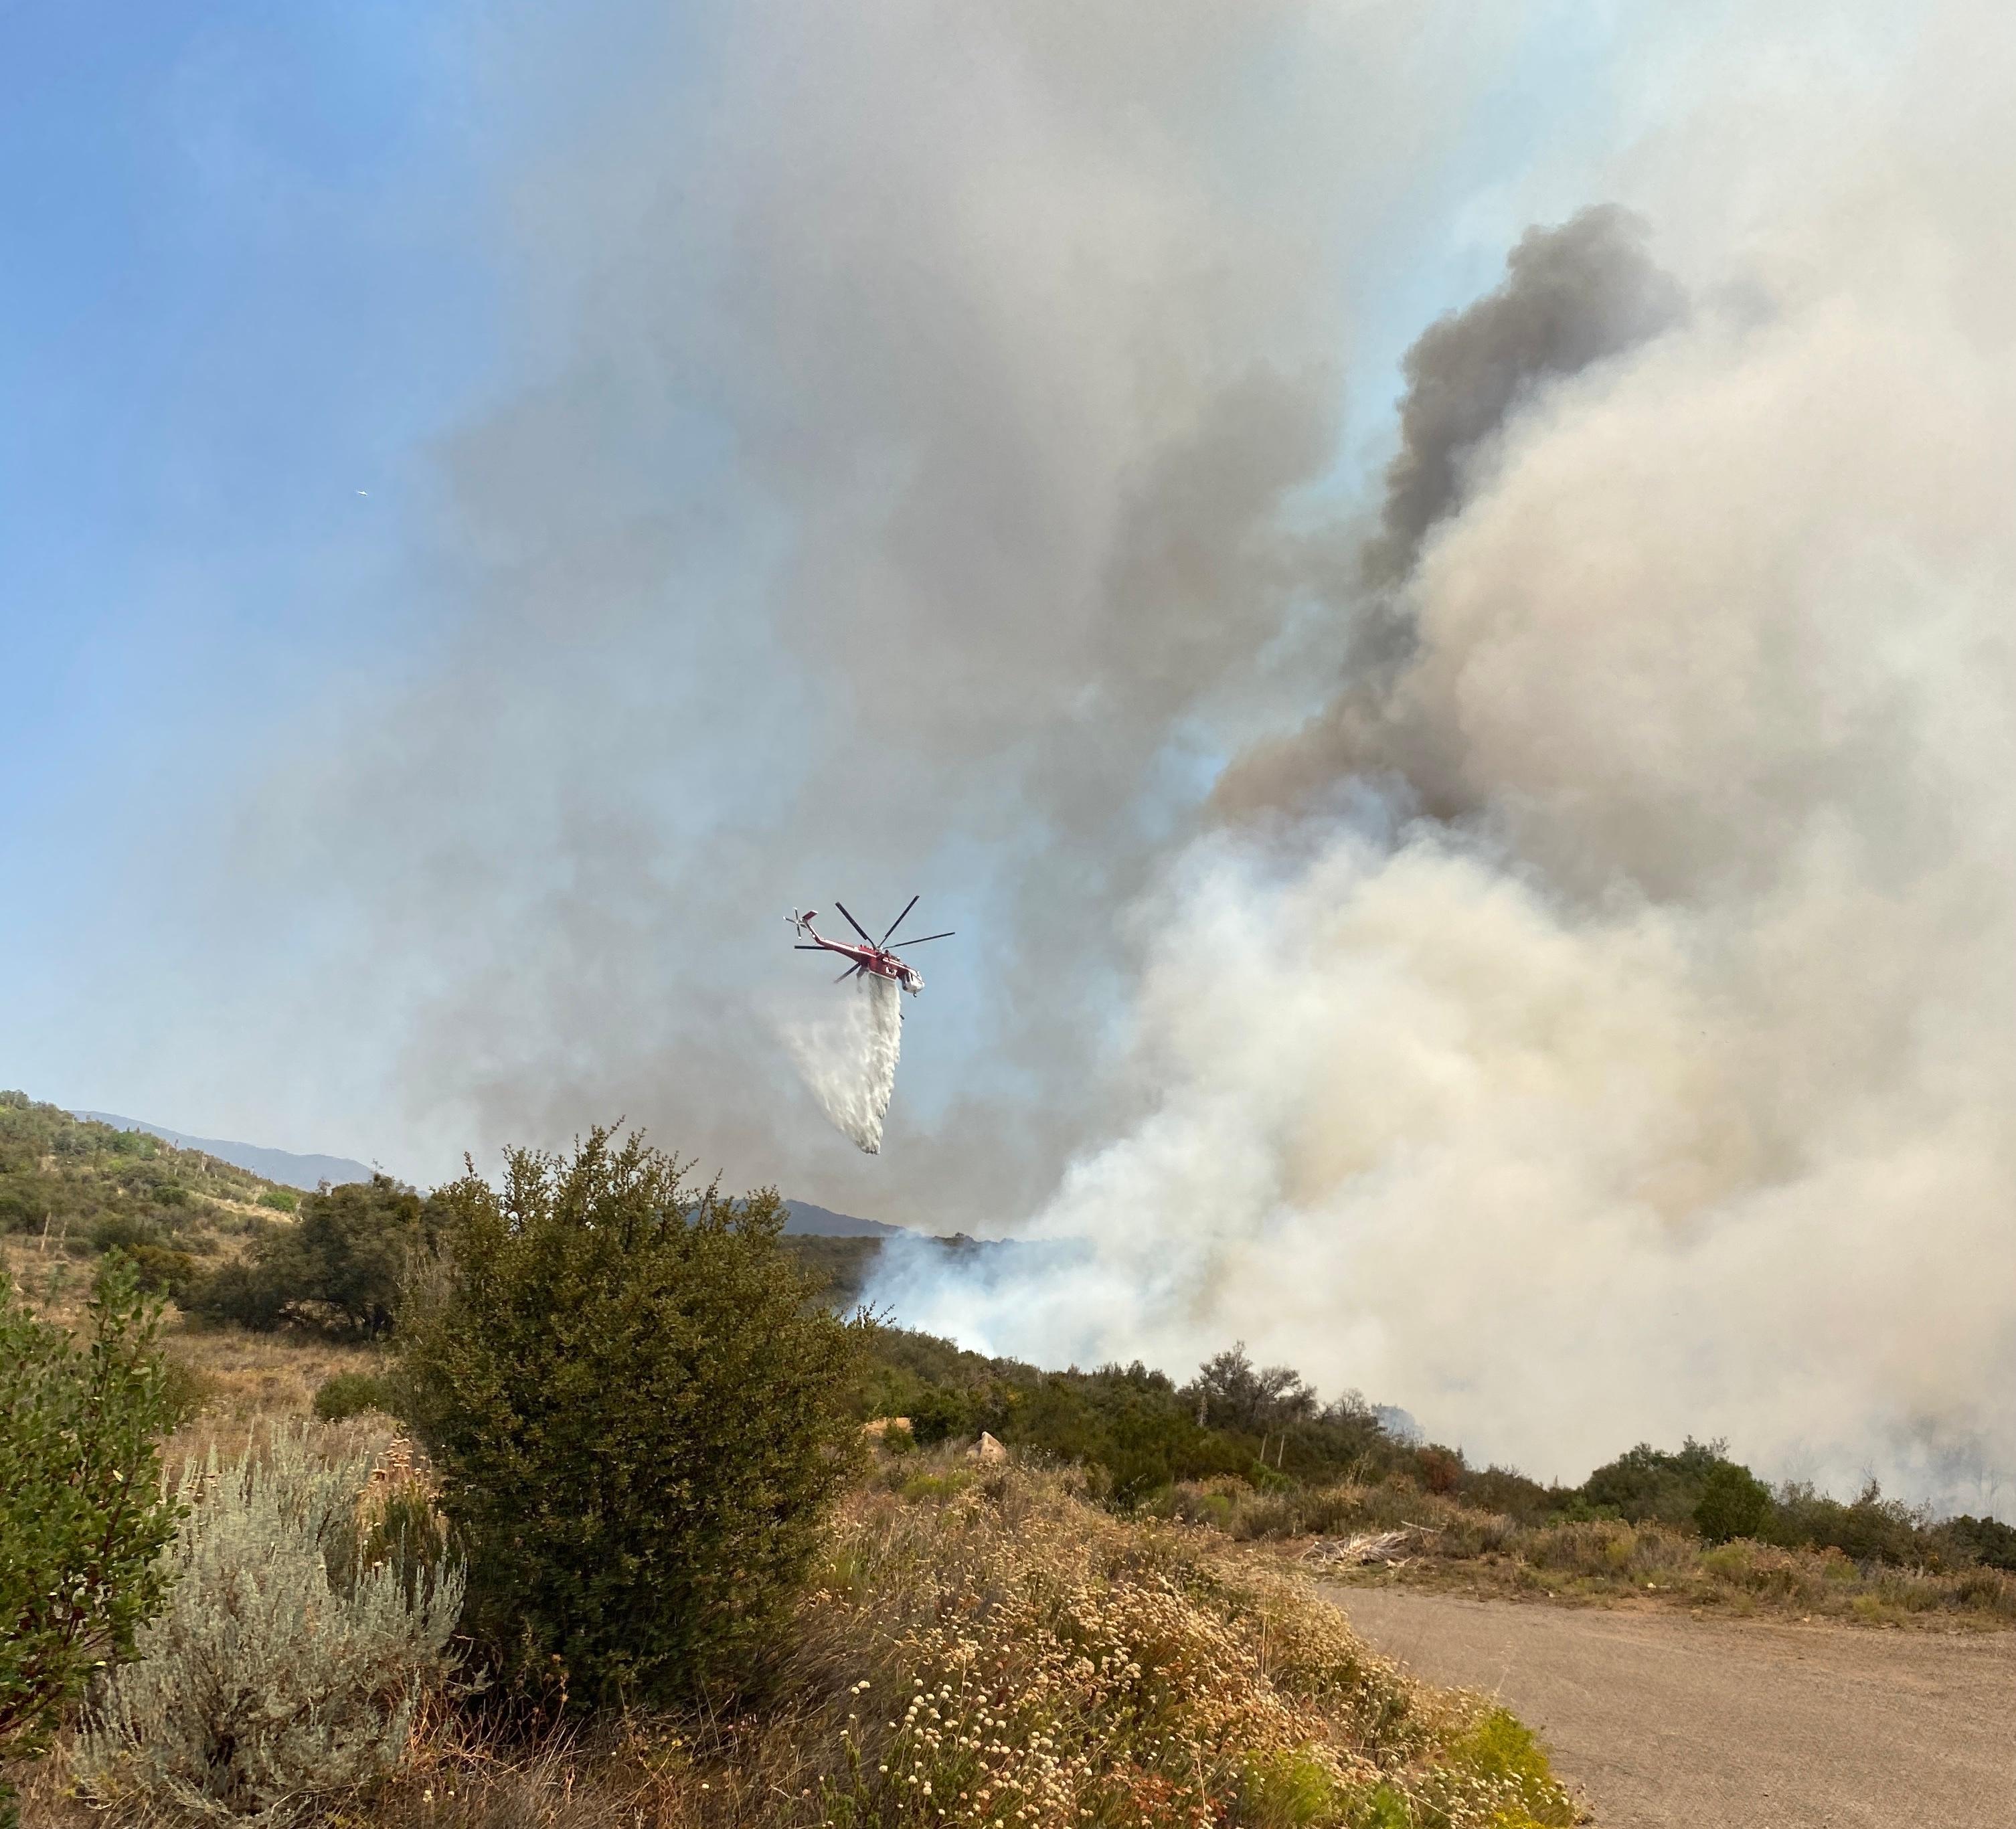 Large helicopter (Type one) dropping water on a section of the fire, smoke and brush in the foreground